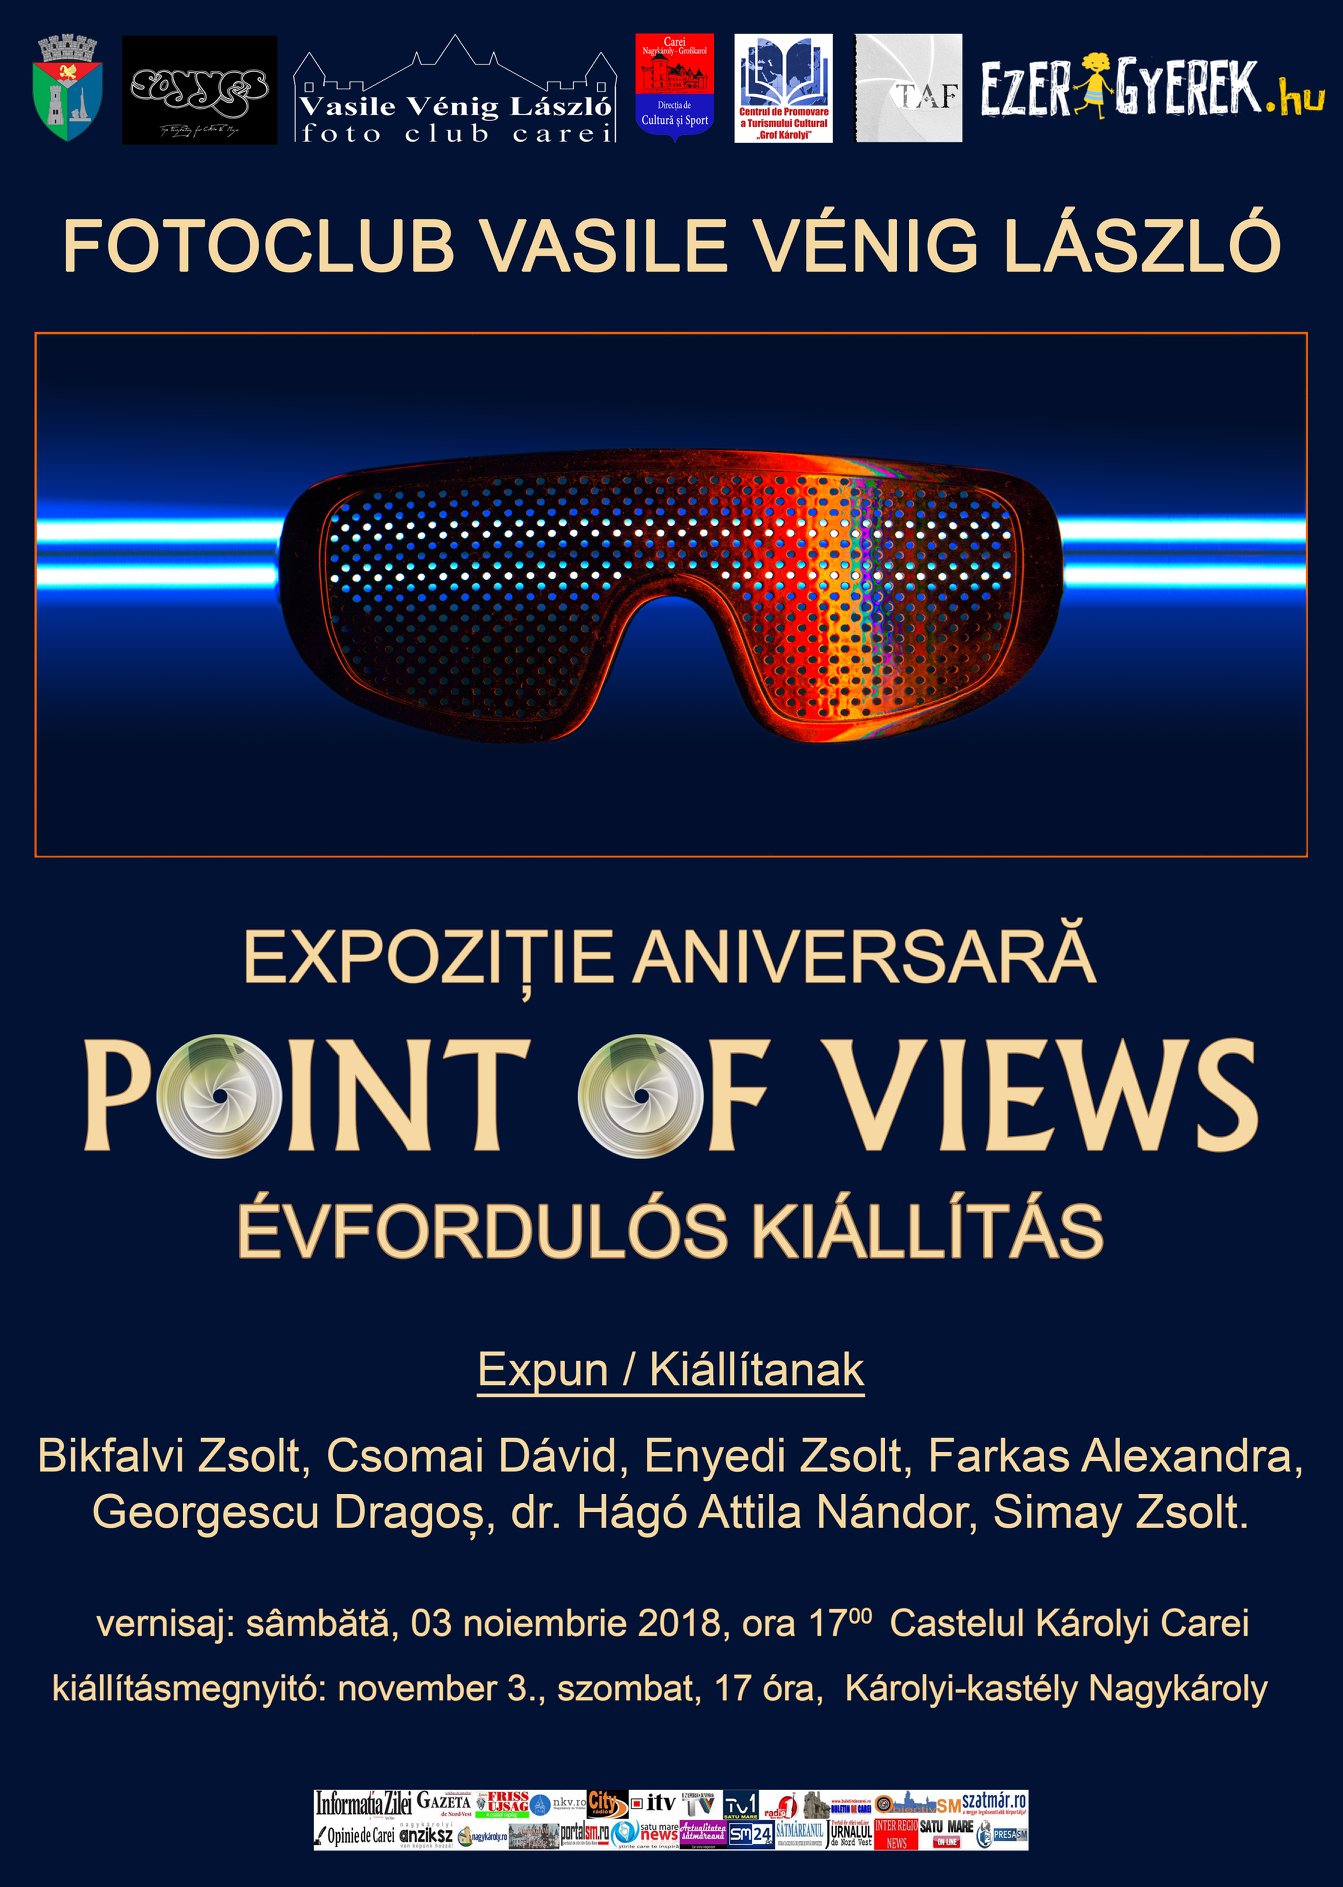 ”Point of Views”